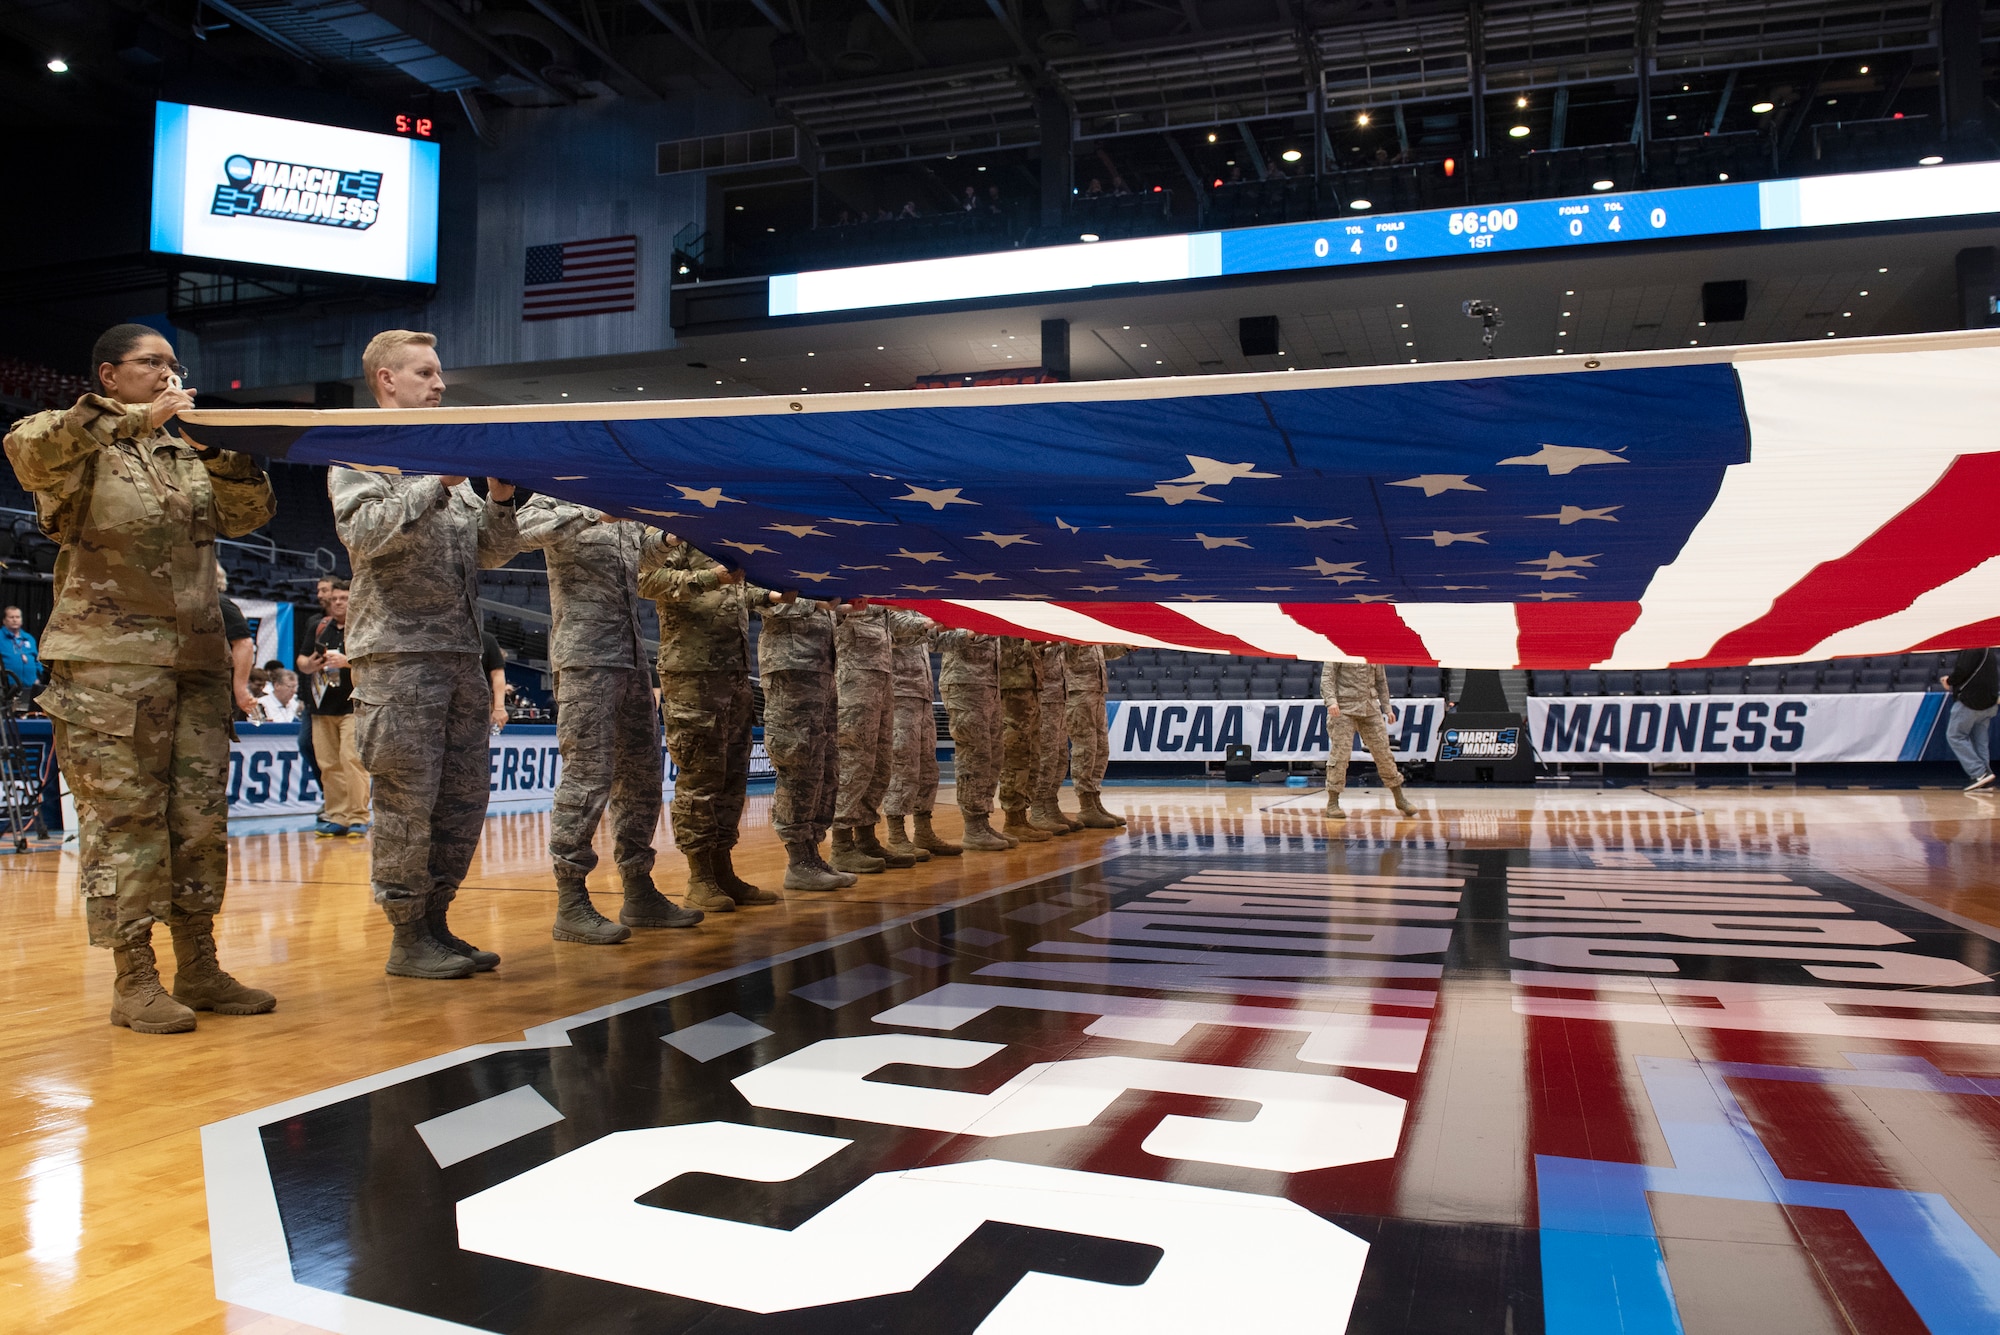 Dayton First Four basketball tip off March 17 (U.S. Air Force photo/Michelle Gigante)